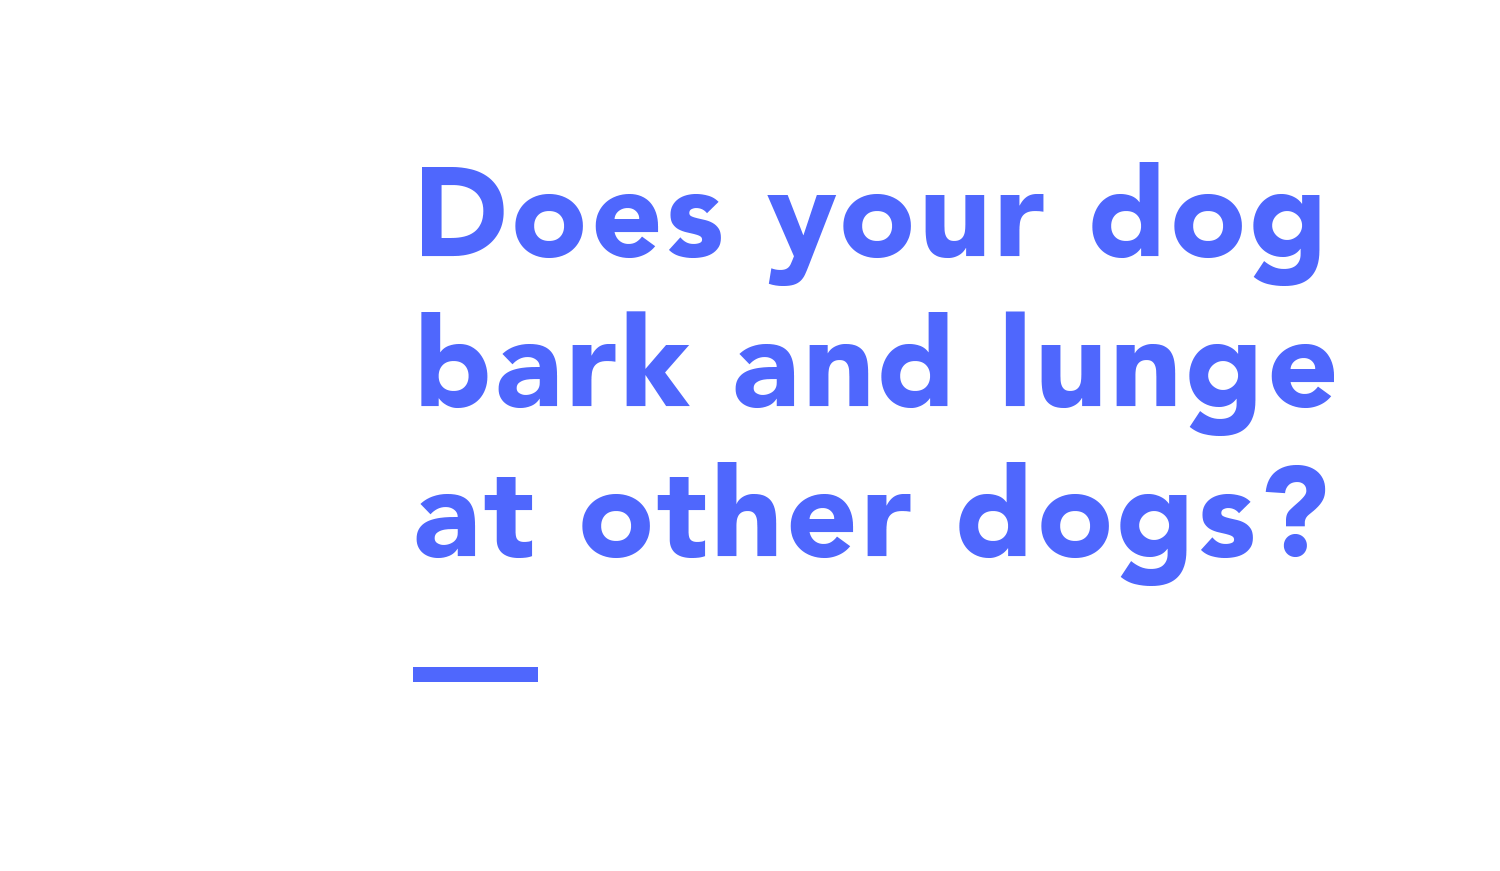 does-your-dog-bark-and-lunge-at-other-dogs-text.png